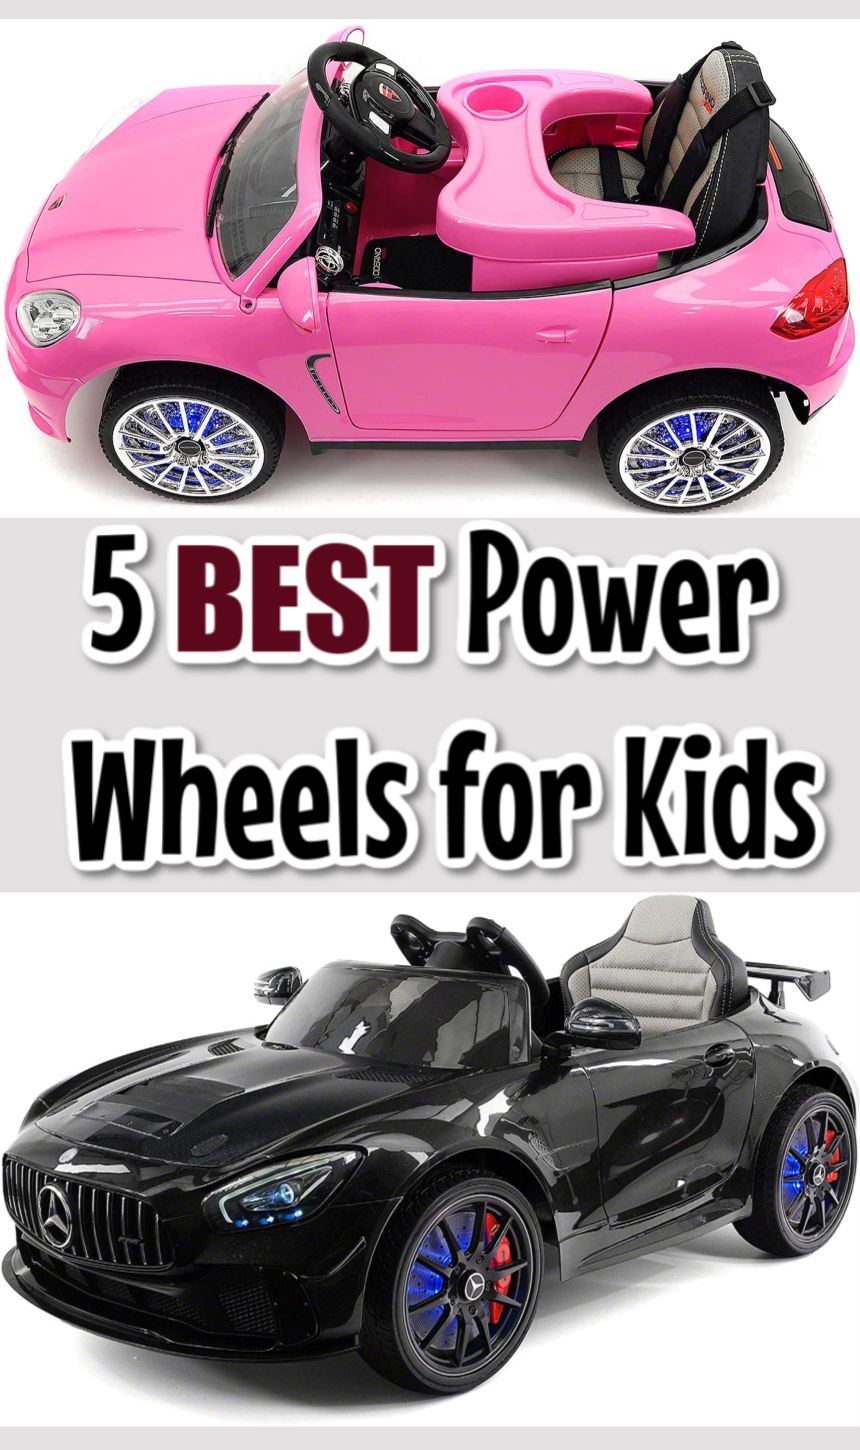 The 5 Absolute Best Power Wheels for Kids in 2020